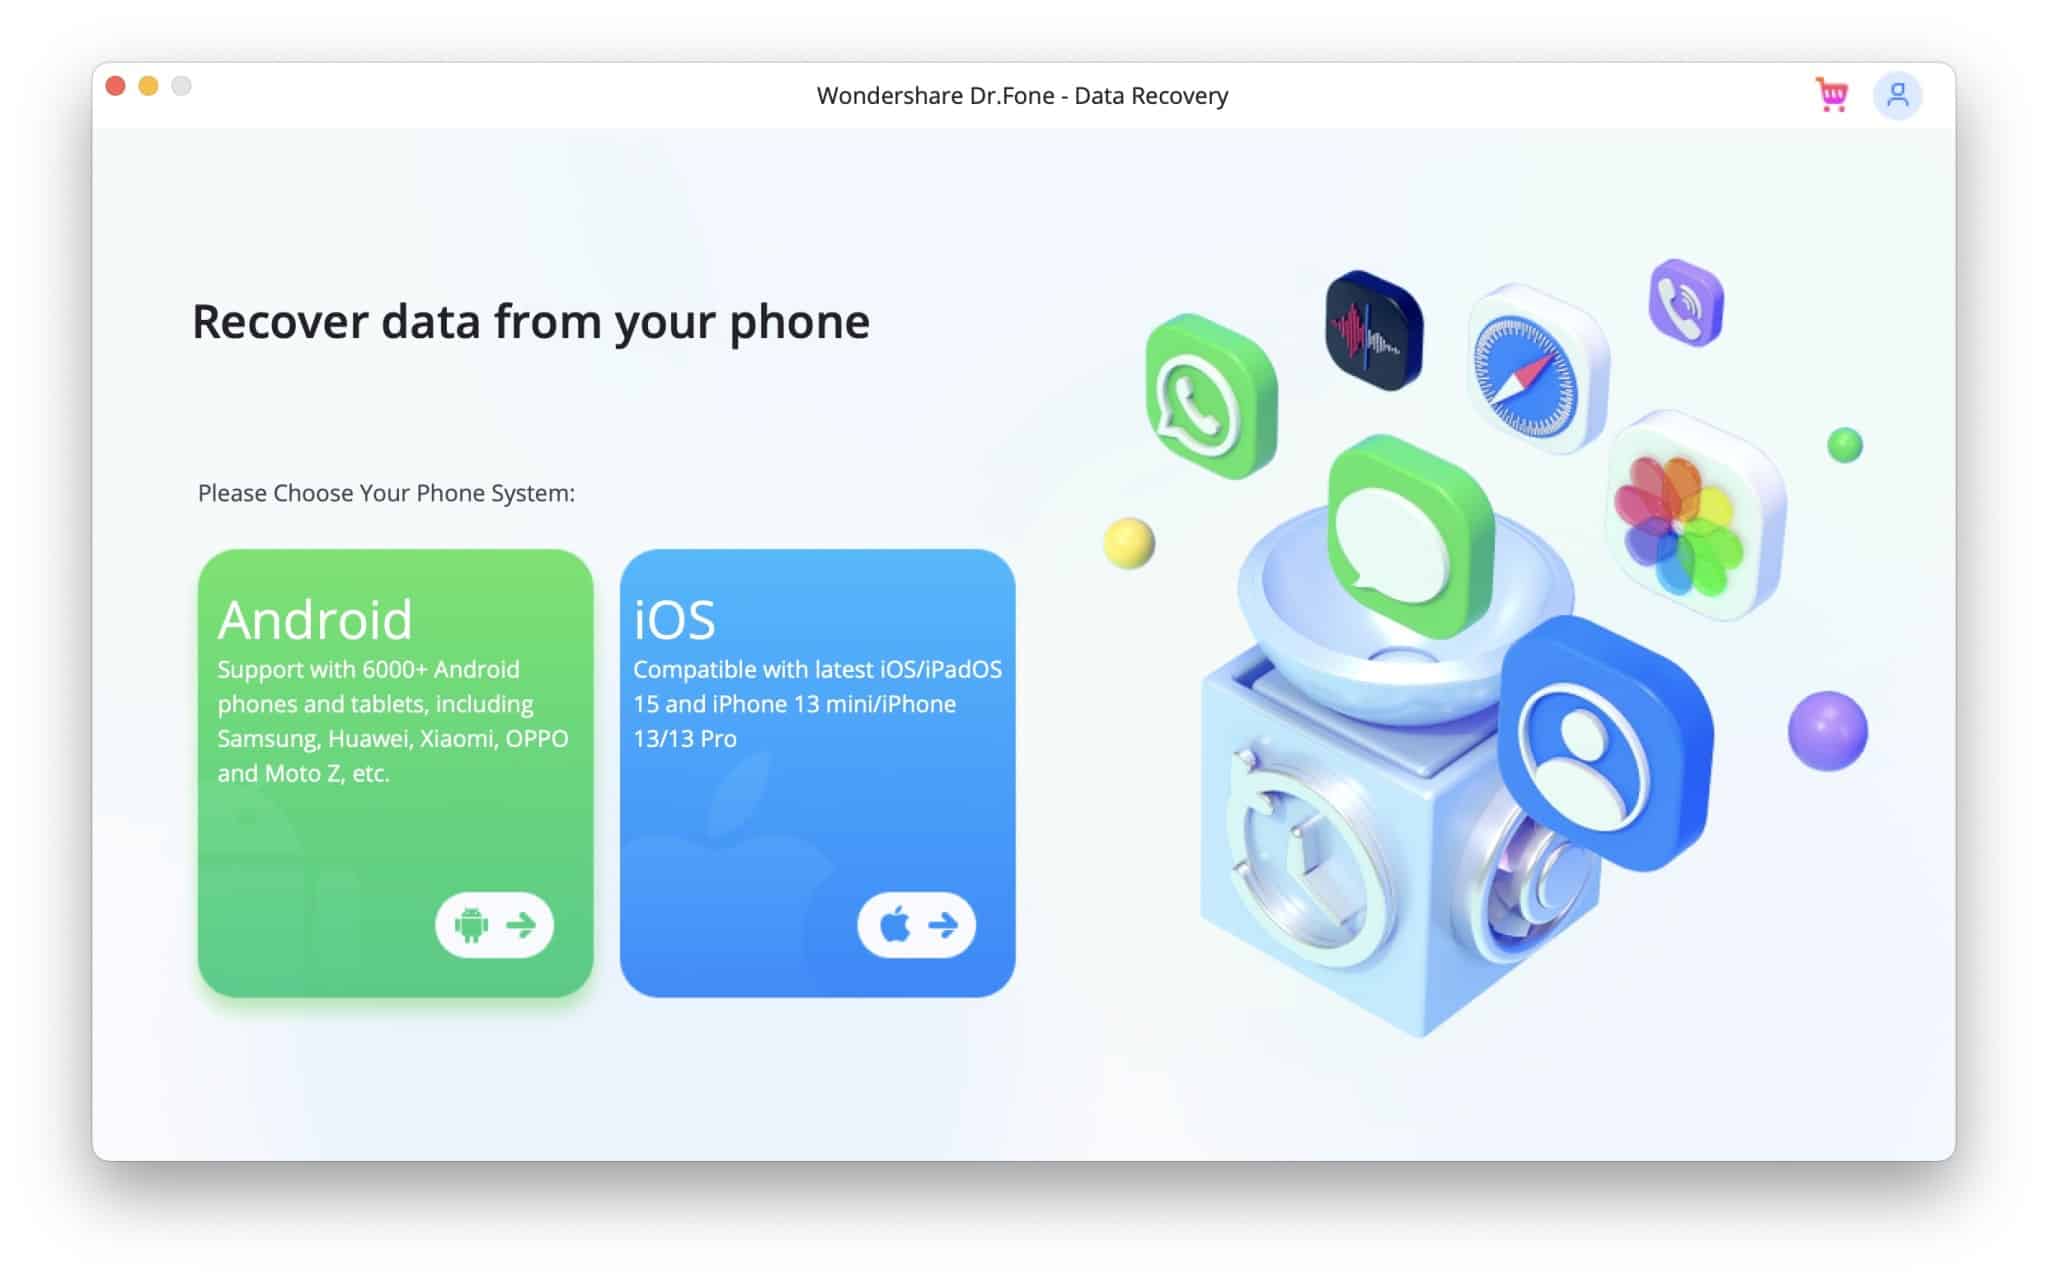 Wondershare Dr.Fone Data Recovery Interface